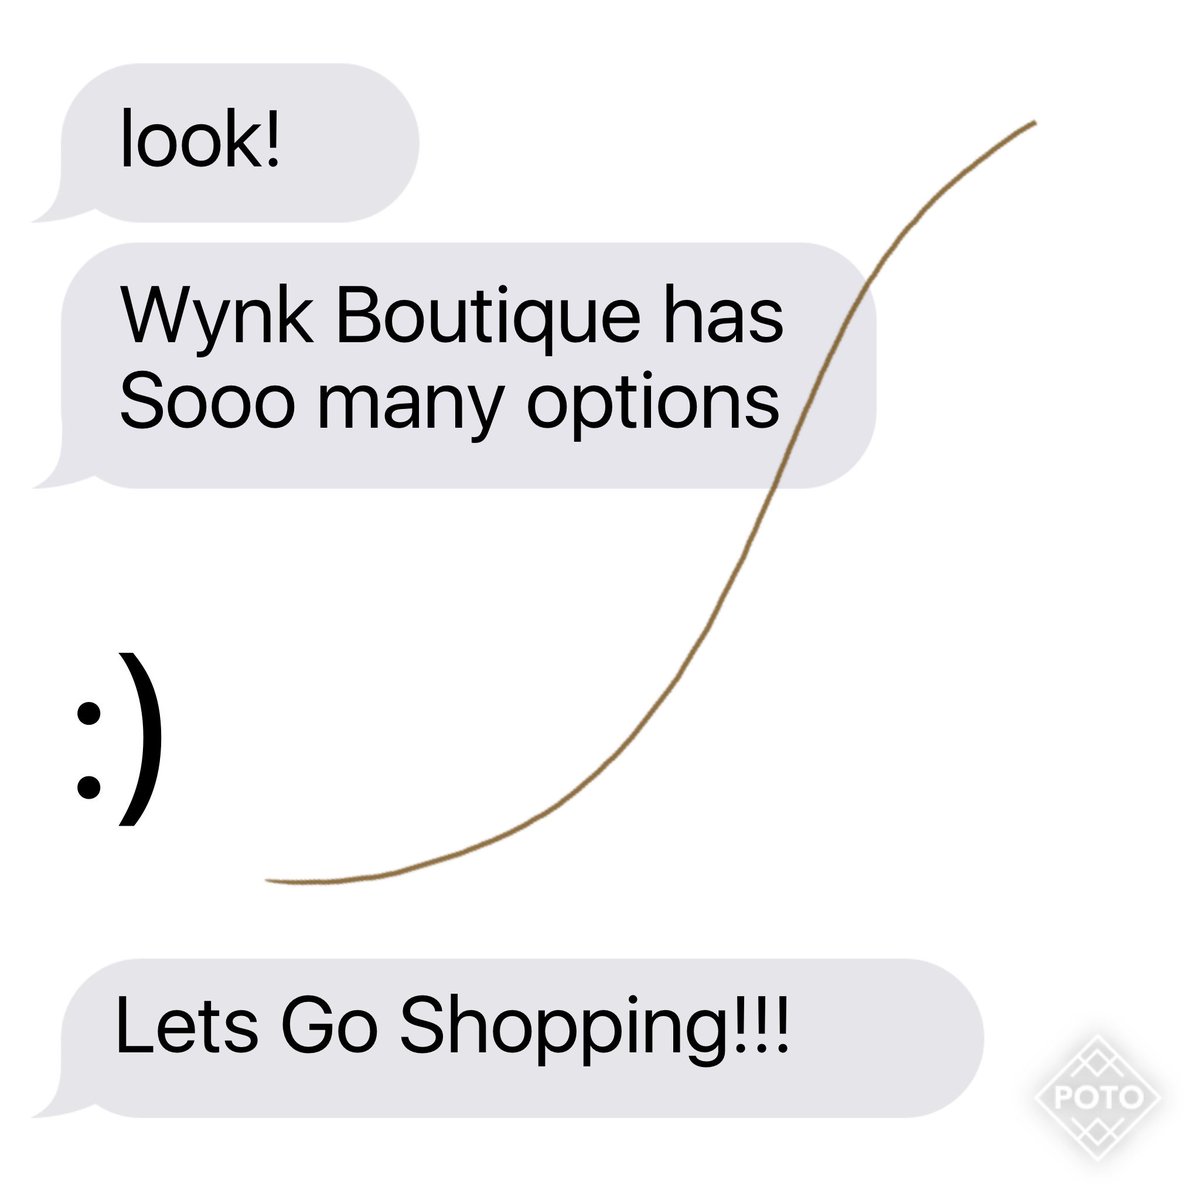 #somanyoptions at Wynk #boutique 😉 #wynkkids #wynkbeauty #forthehome #womensclothing #shoes #accessories #shopwynk #downtownhastings #shop